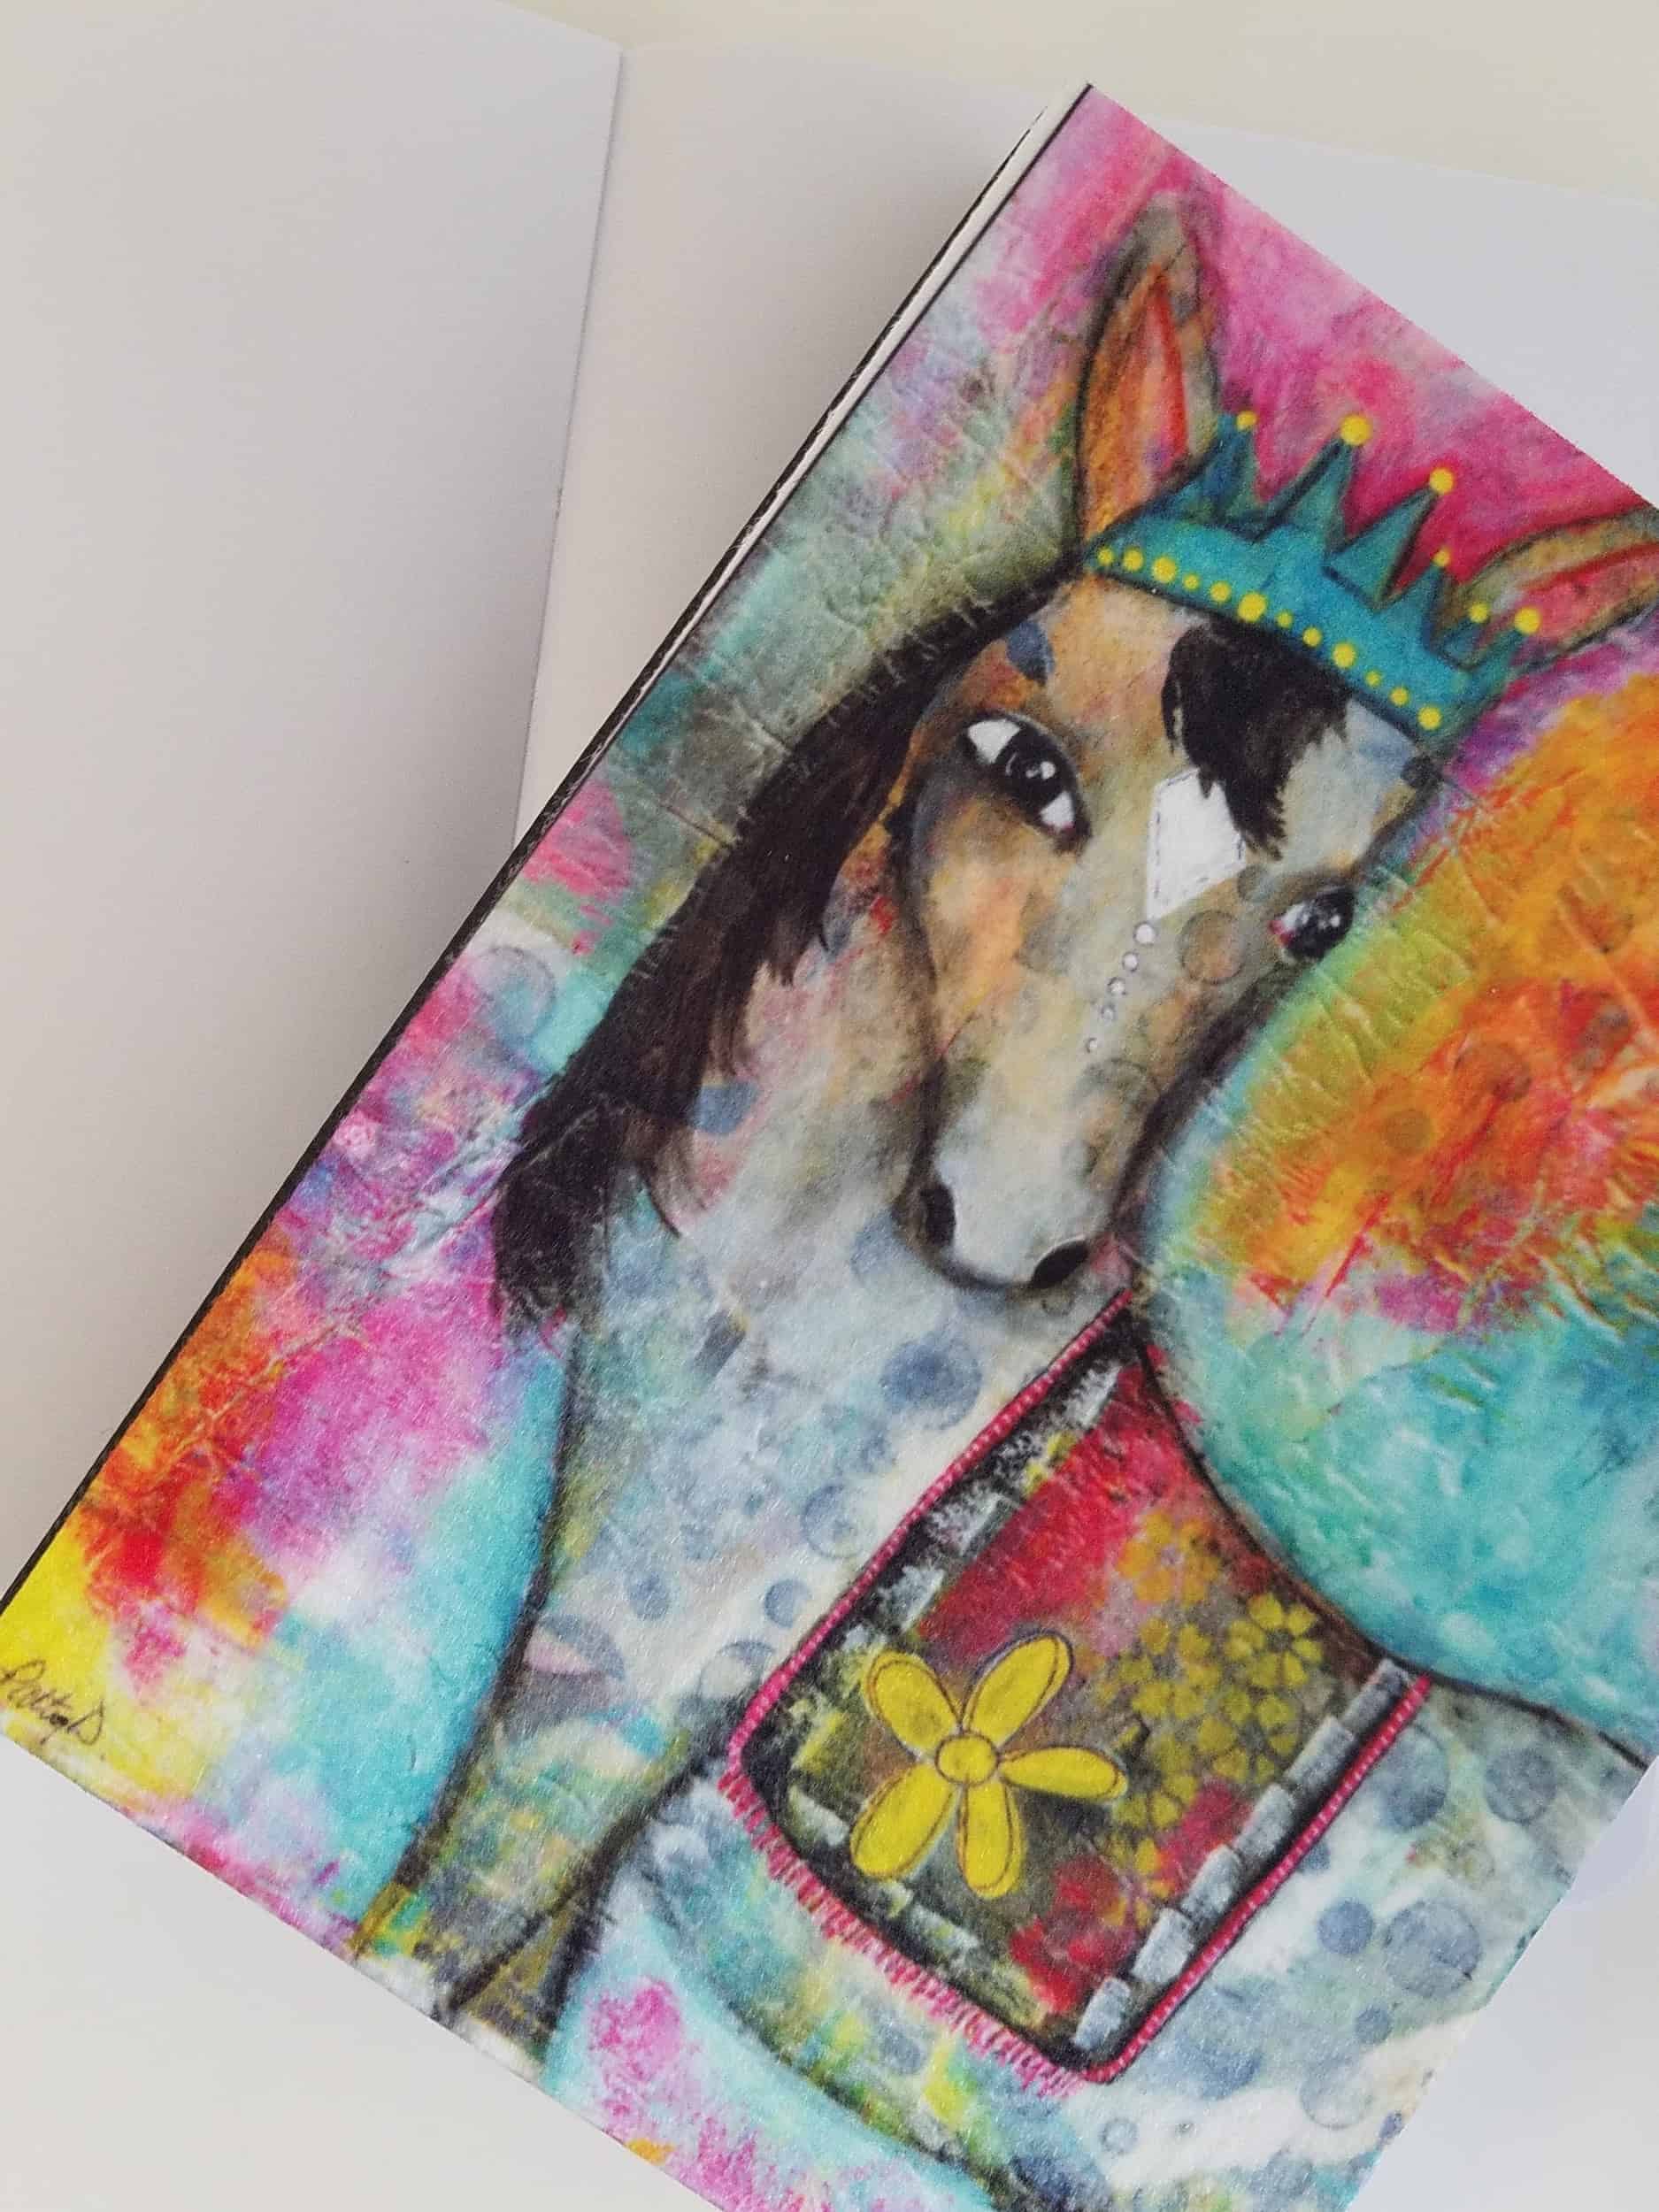 This "Painted Pony" Crowned Critter, Small Blank Journal for notes, lists, sketching and planning is made with love by Studio Patty D! Shop more unique gift ideas today with Spots Initiatives, the best way to support creators.